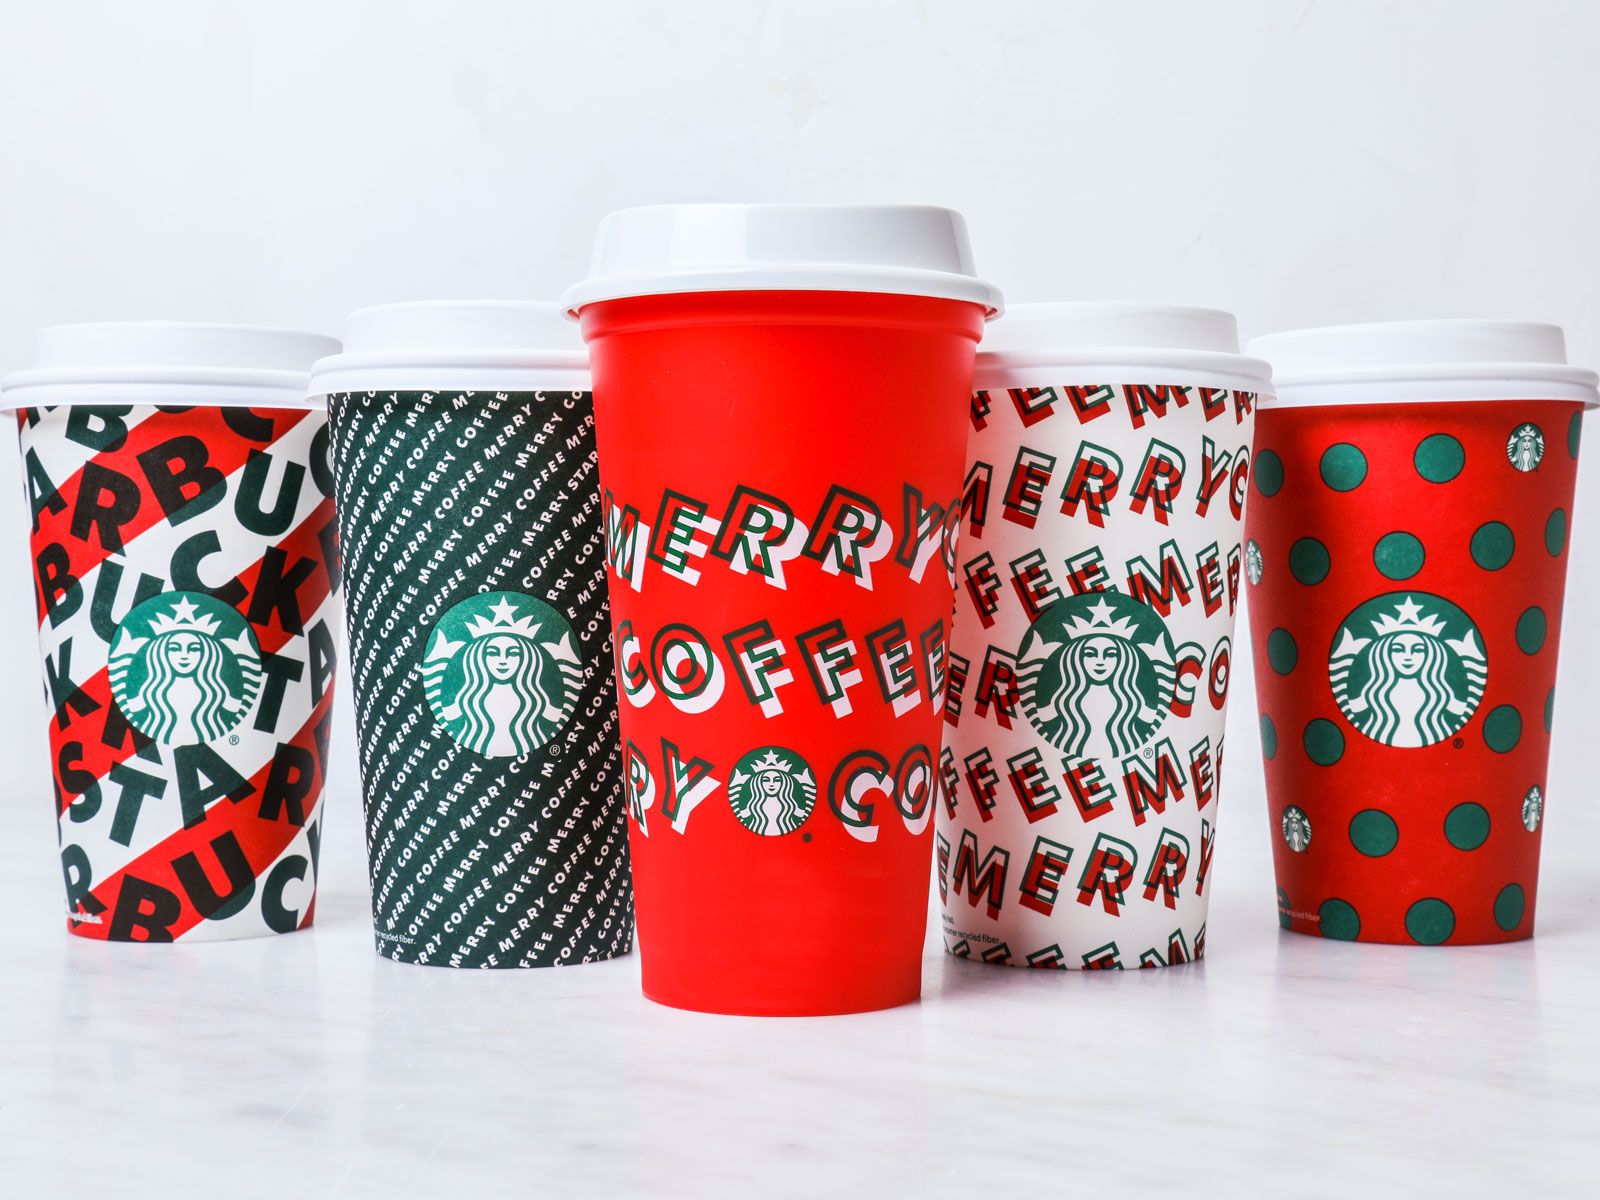 Starbucks Unveils Holiday Cup Designs for 2019. Food & Wine